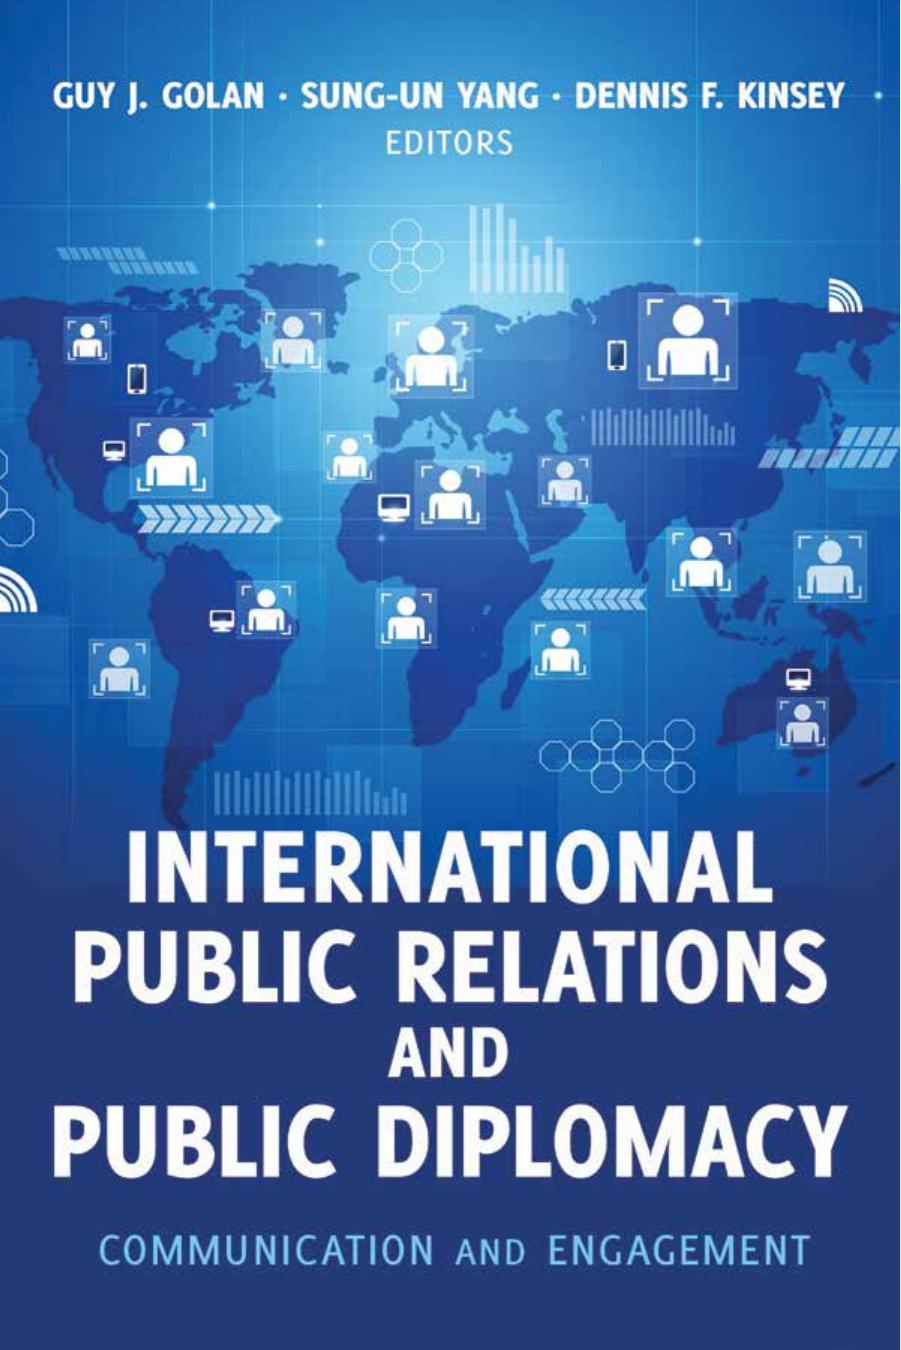 International public relations and public diplomacy: communication and engagement